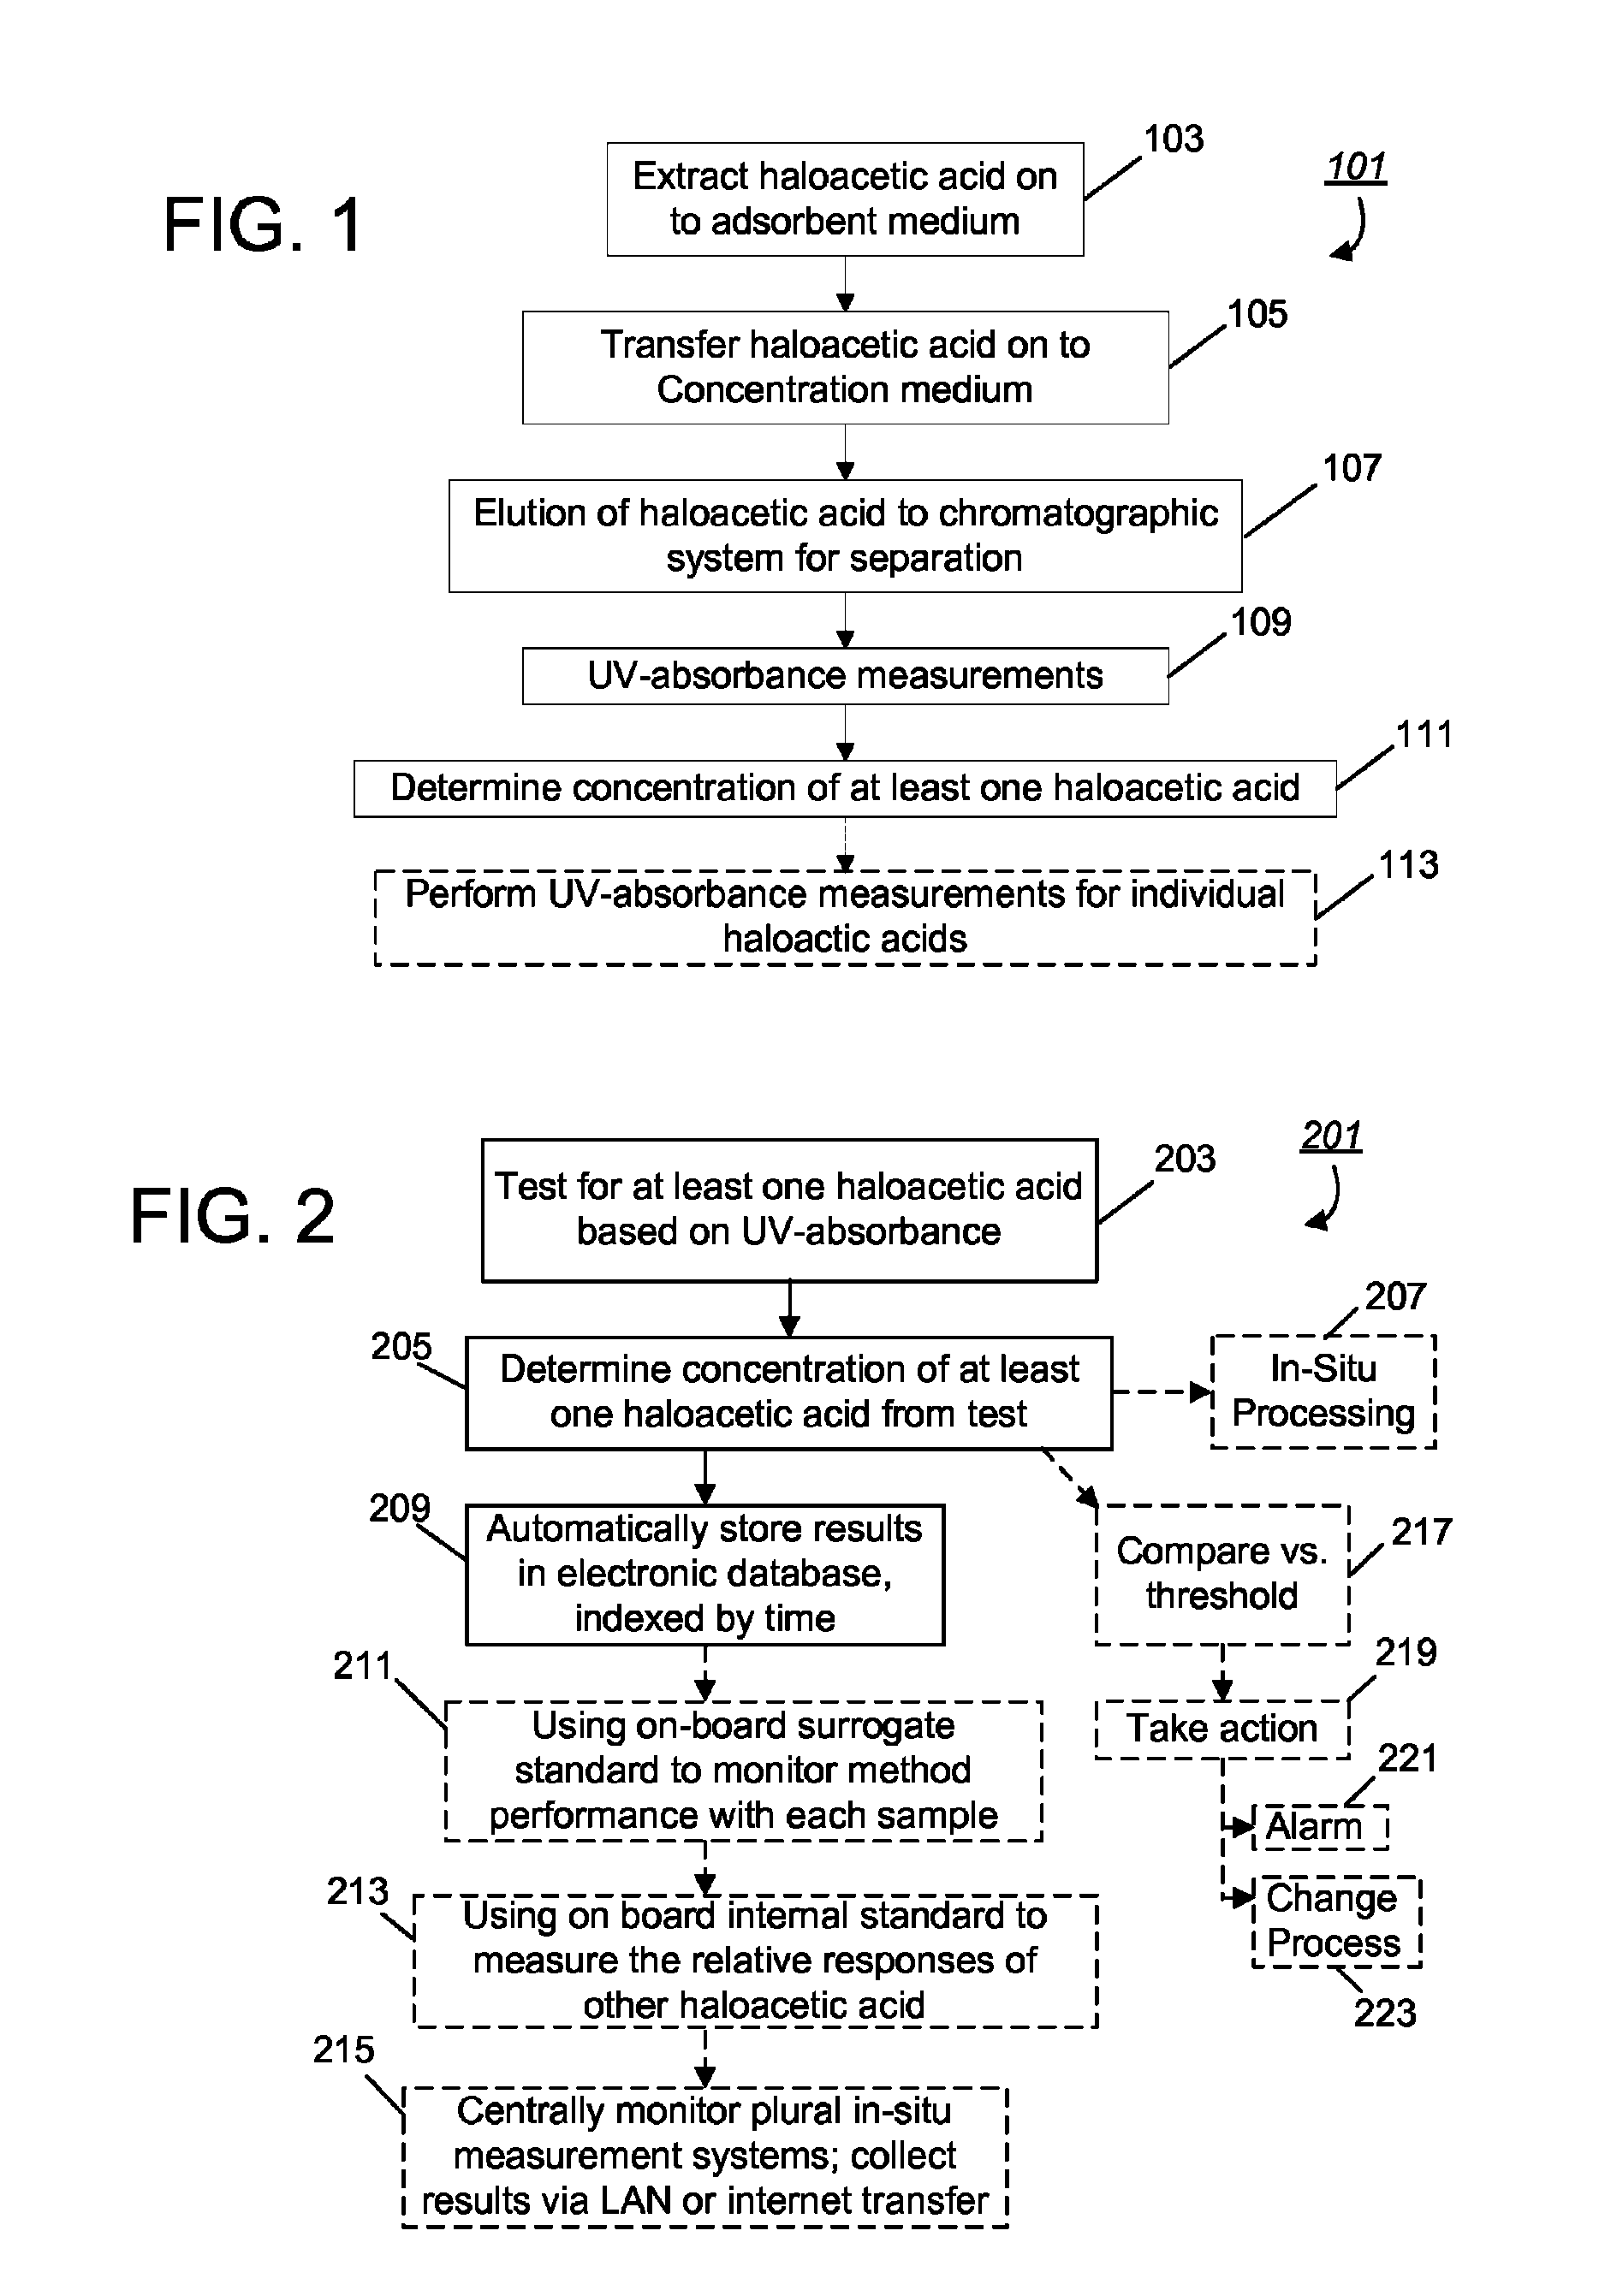 Method and apparatus for determination of haloacetic acid (“HAA”) presence in aqueous solution